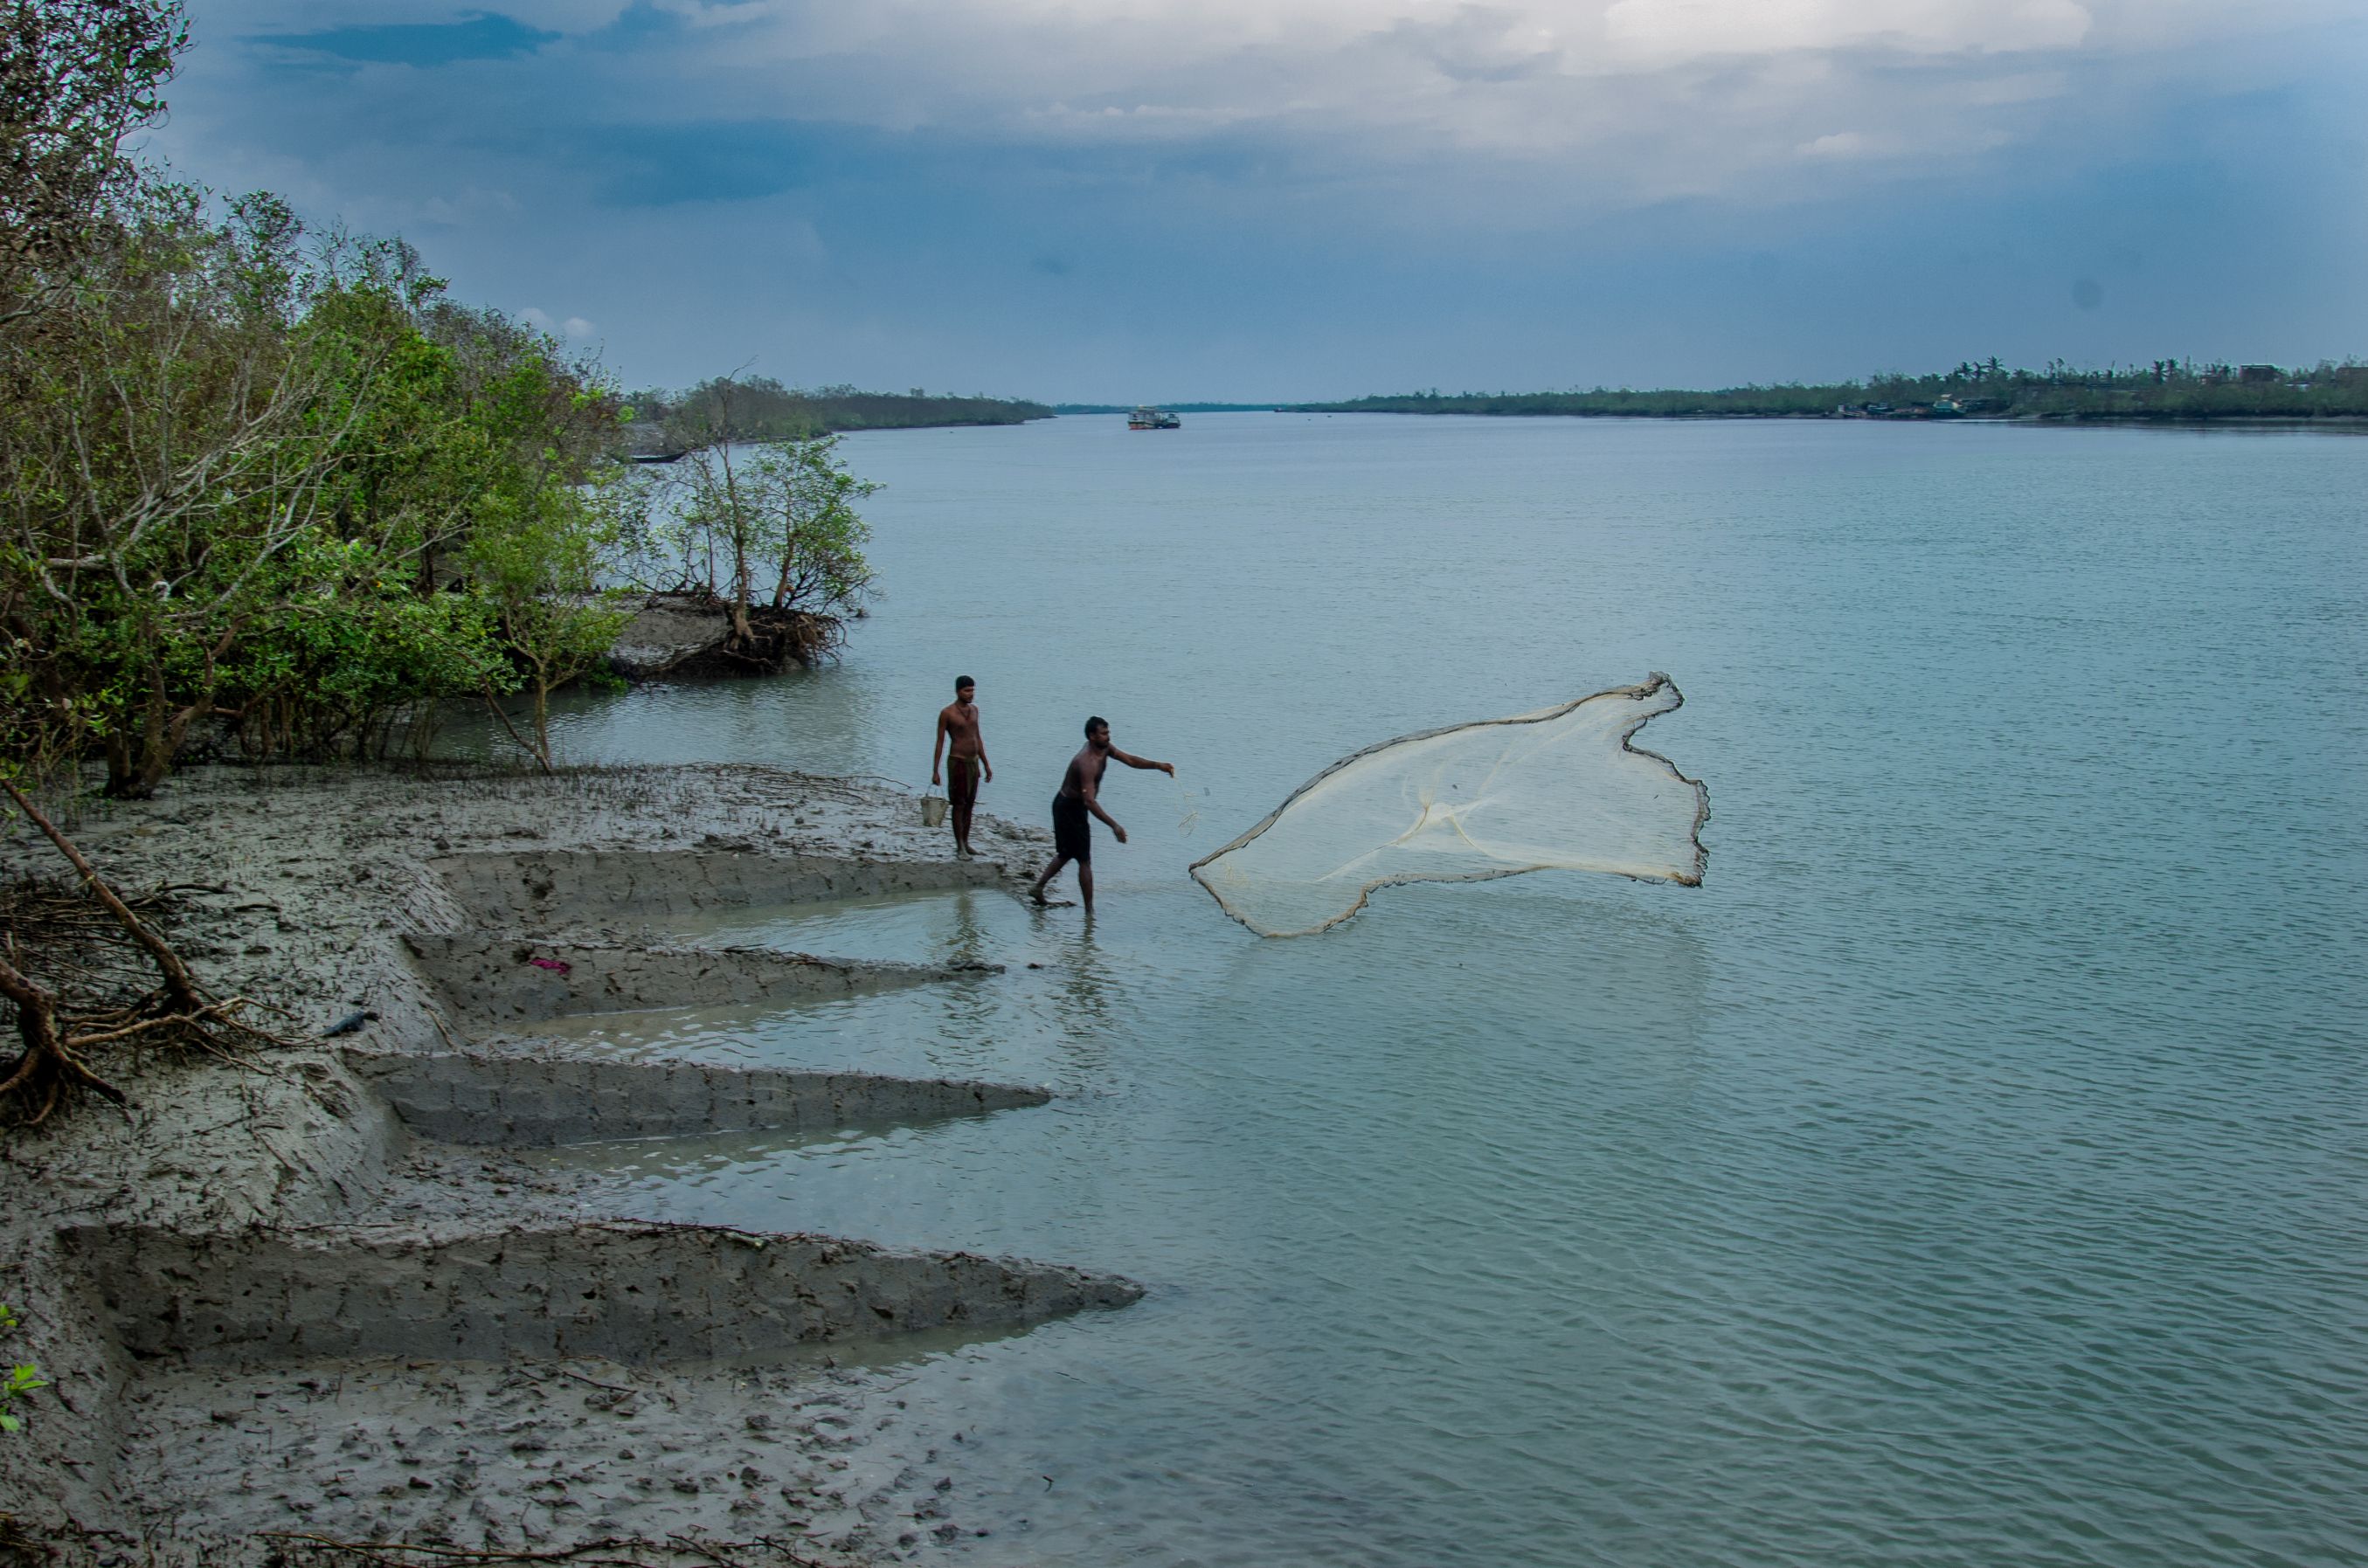 Fishing is a common profession in the Sundarbans. Most locals fish during the day. (Image: WaterAid, Subhrajit Sen)